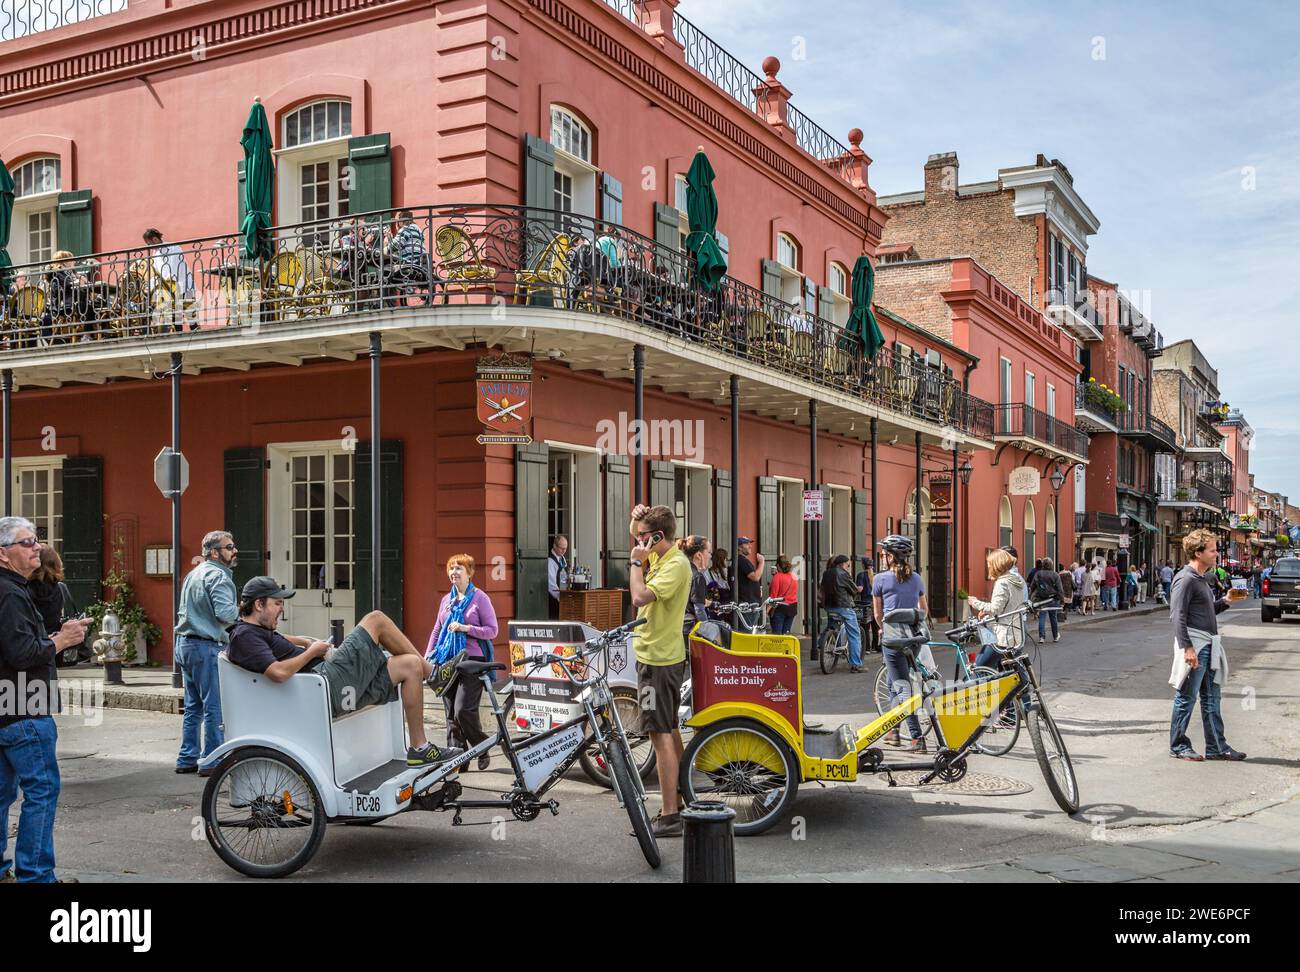 Bike taxi drivers wait for passengers in front of Dickie Brennan's Tableau restaurant on Jackson Square in the French Quarter of New Orleans, Louisana Stock Photo